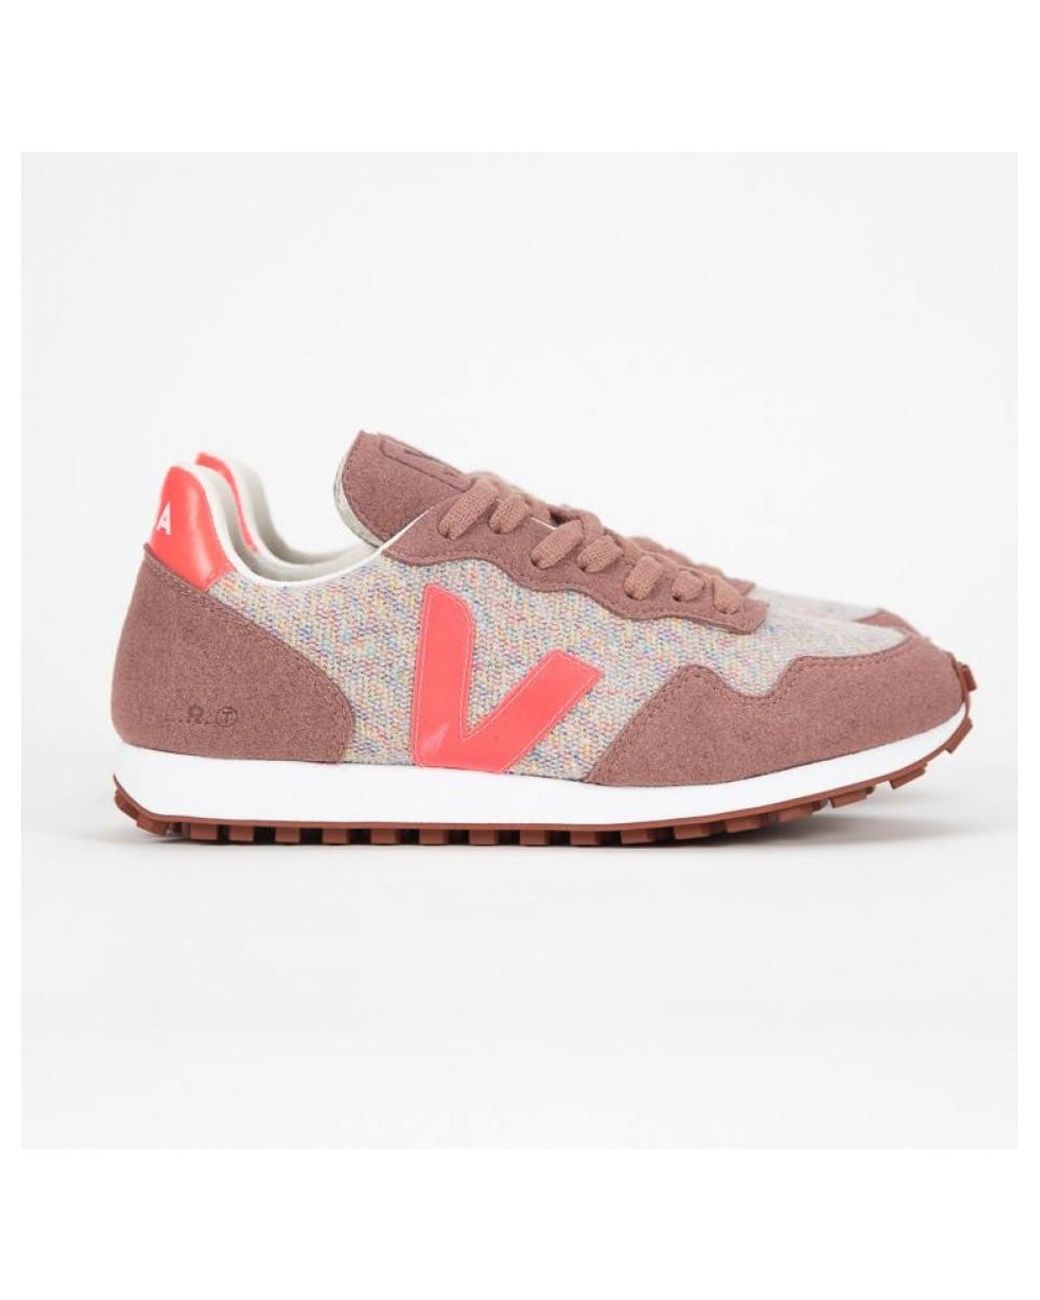 Veja Sdu Rec Flannel Cloudy Rose Flouro Trainers in Pink | Lyst Canada